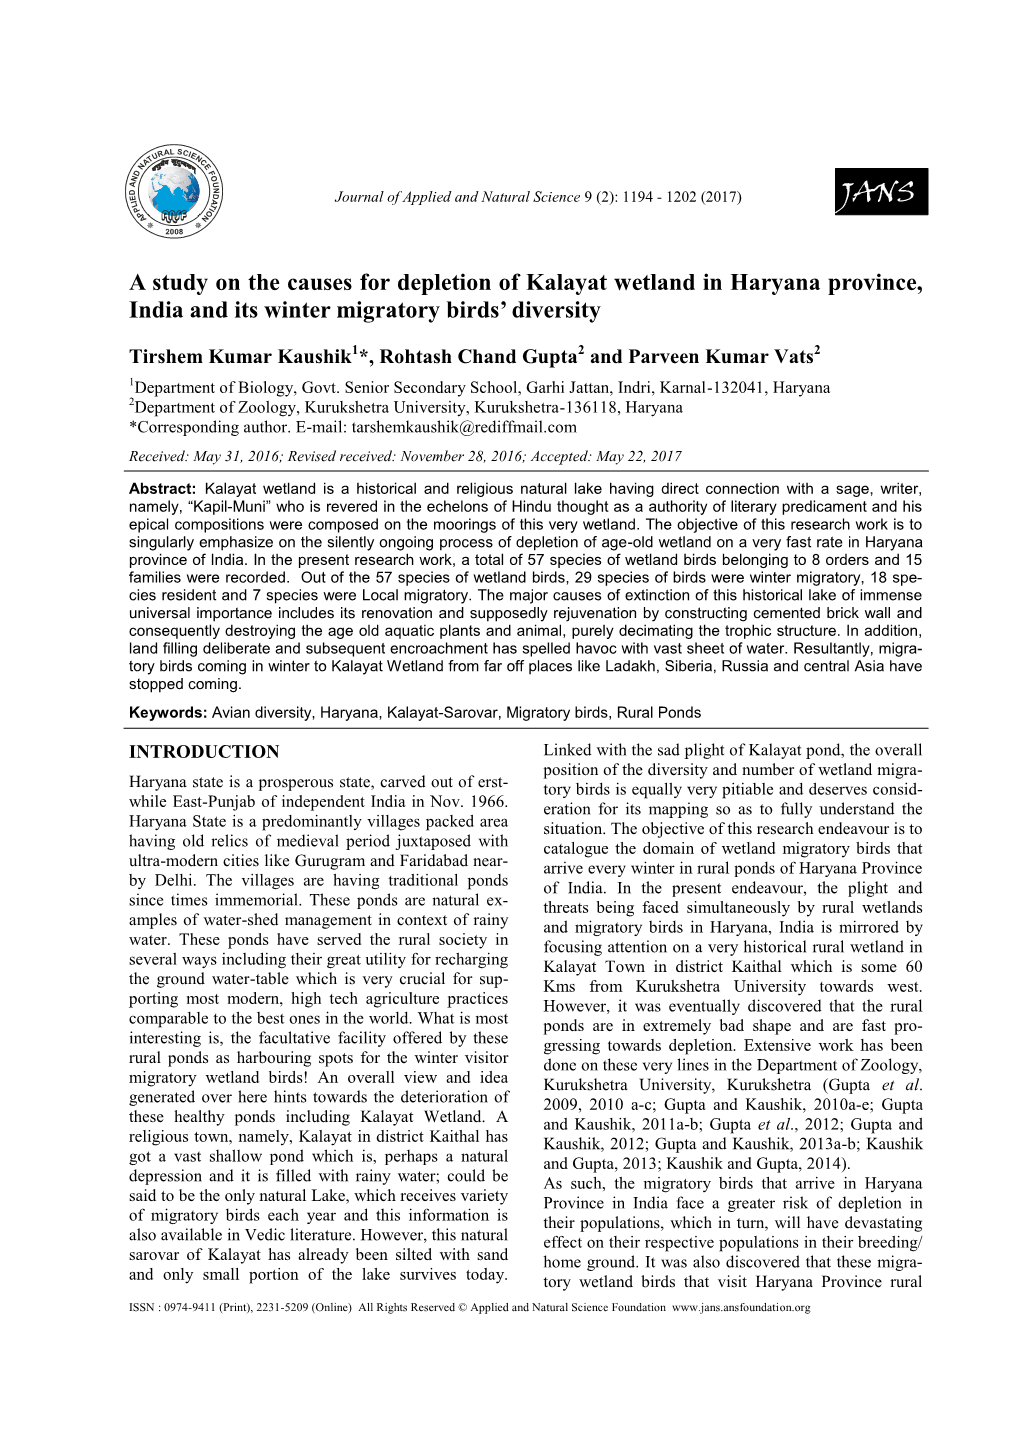 A Study on the Causes for Depletion of Kalayat Wetland in Haryana Province, India and Its Winter Migratory Birds’ Diversity